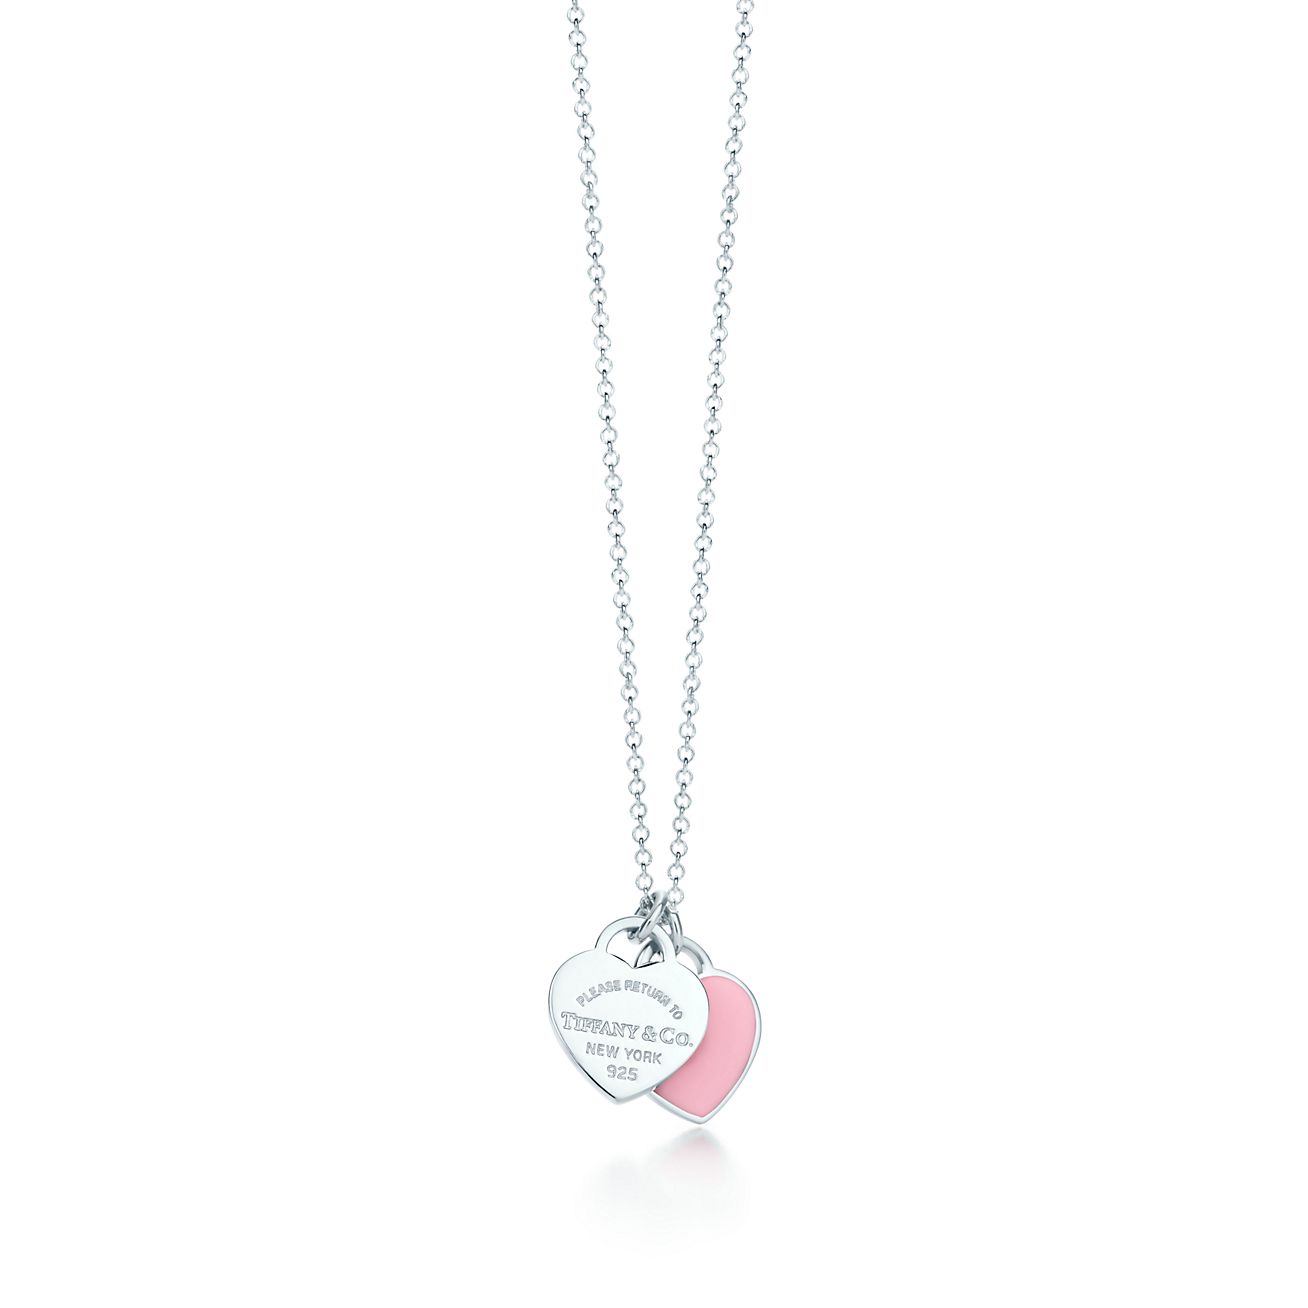 Return to Tiffany™ mini double heart tag pendant in silver with pink enamel finish. | Tiffany & Co.